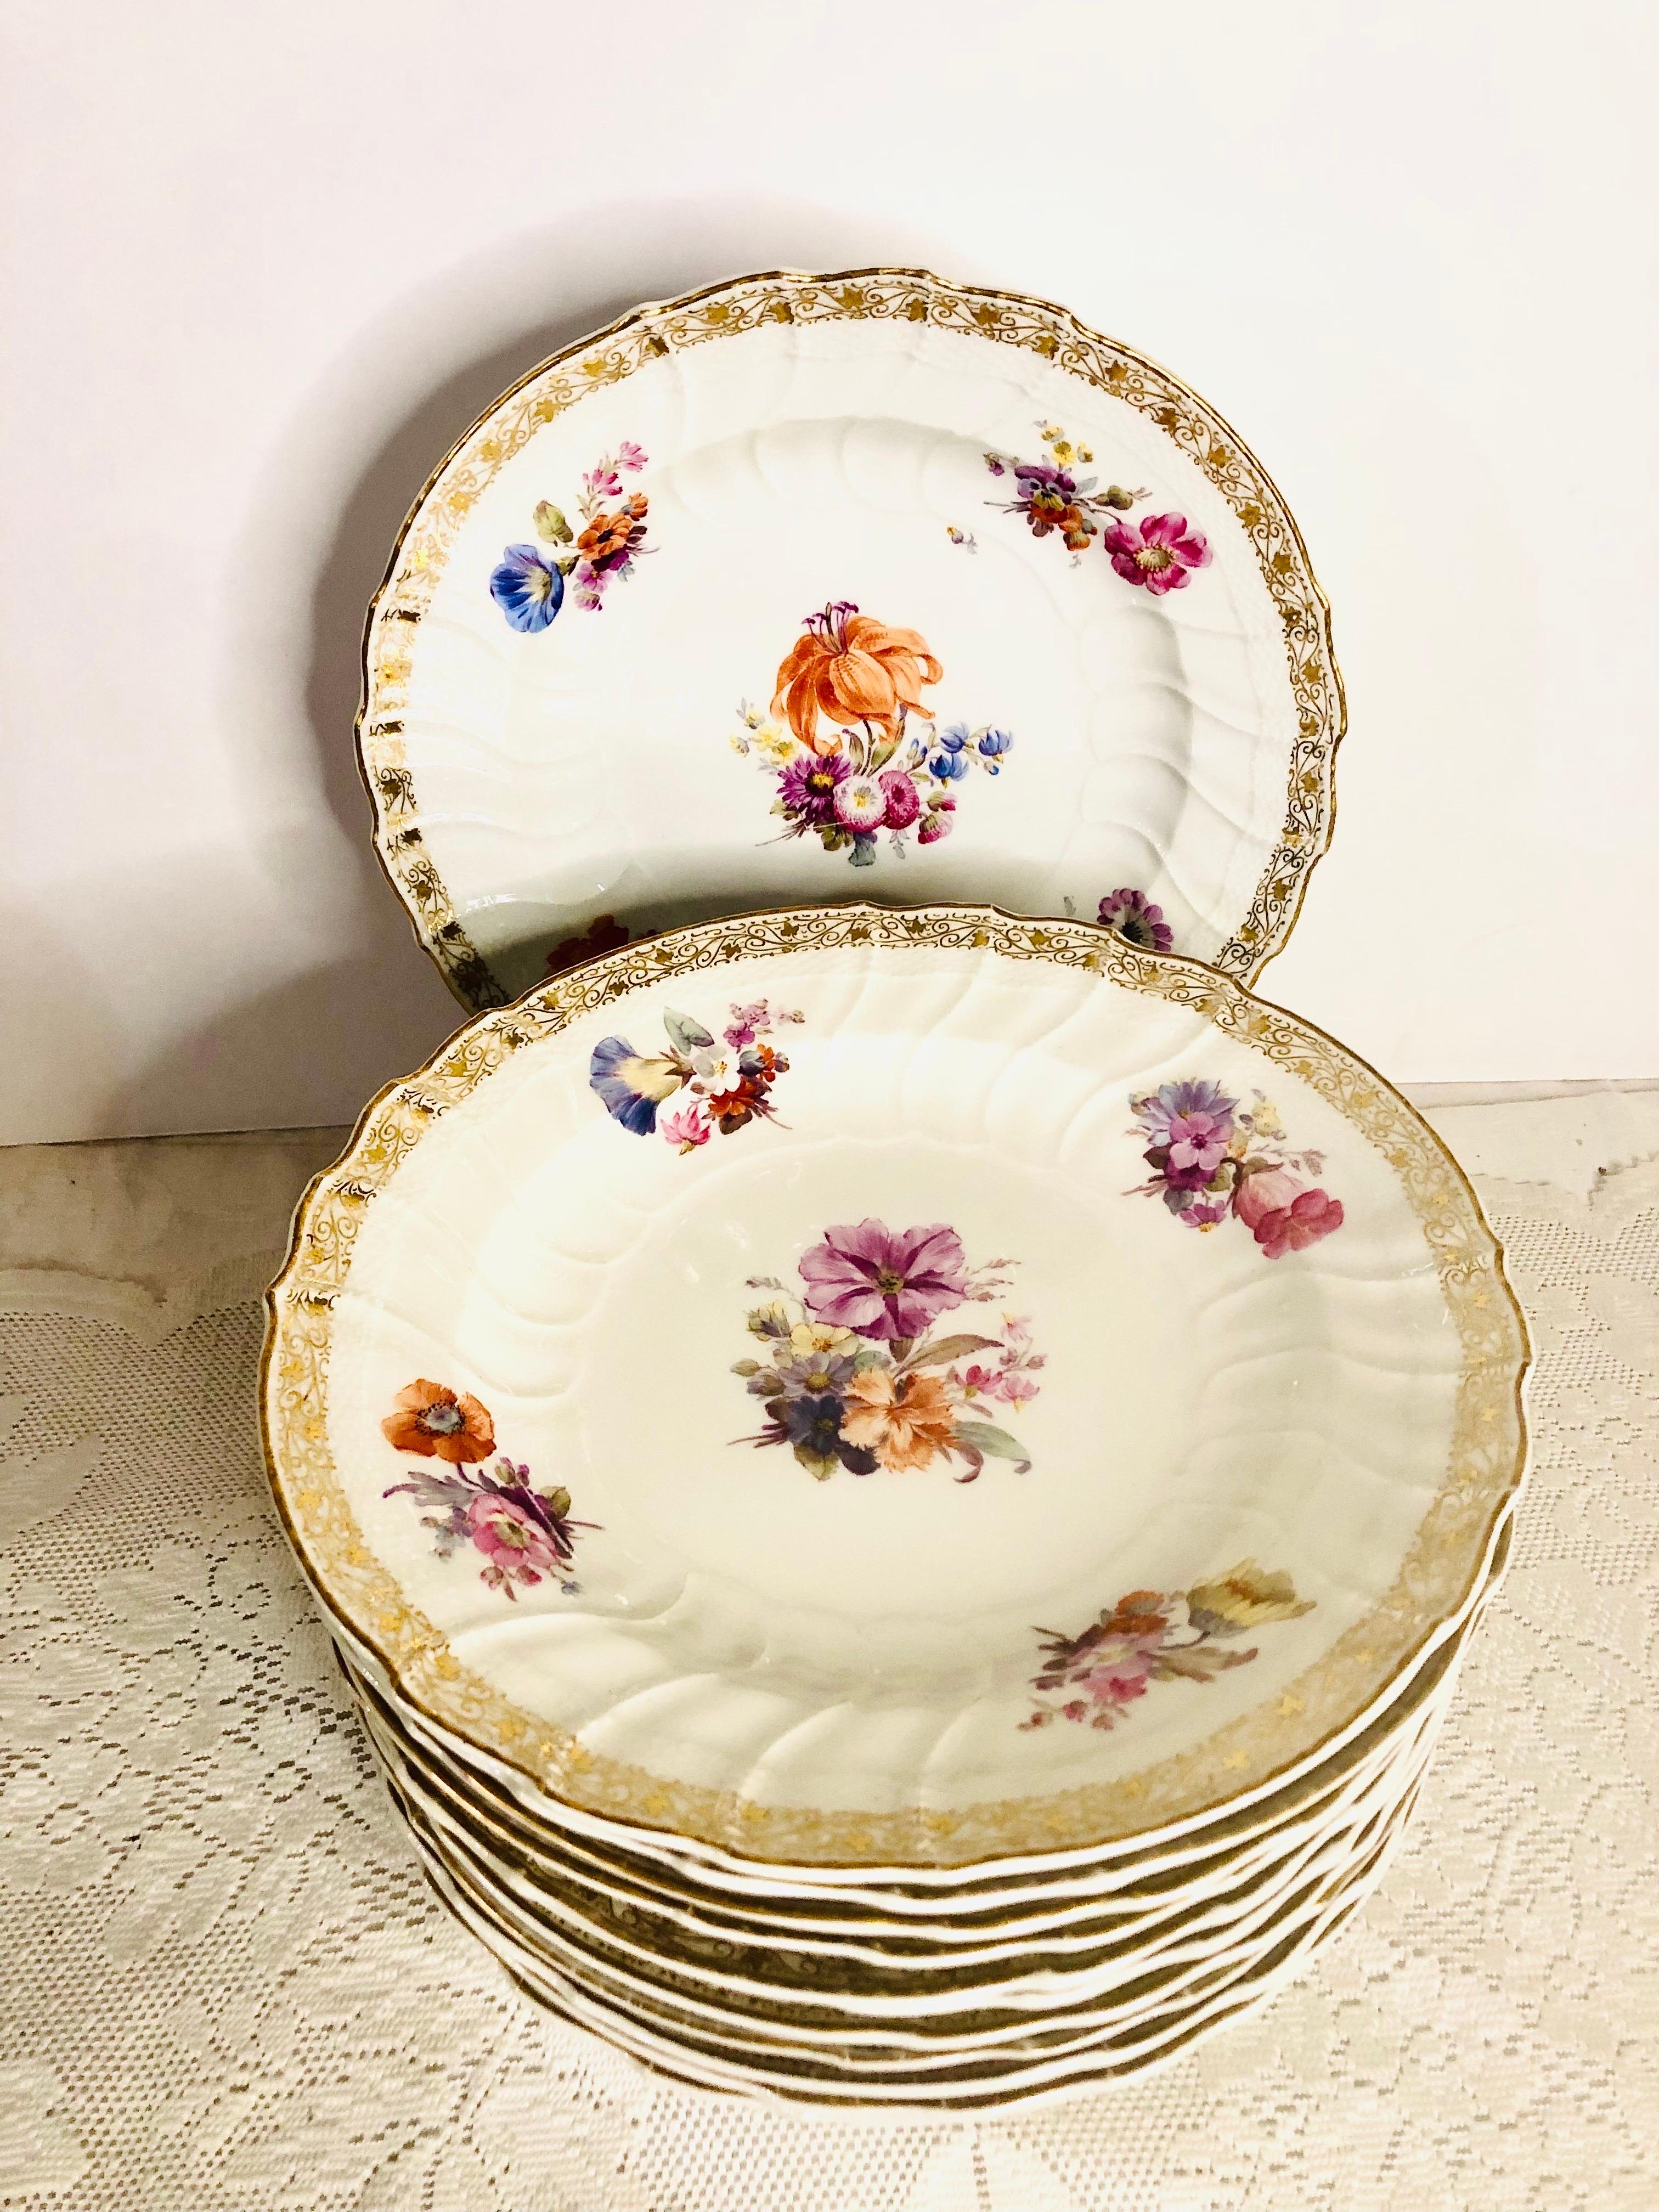 12 KPM Dinner Plates, Each Hand-Painted with a Different Central Flower Bouquet For Sale 9